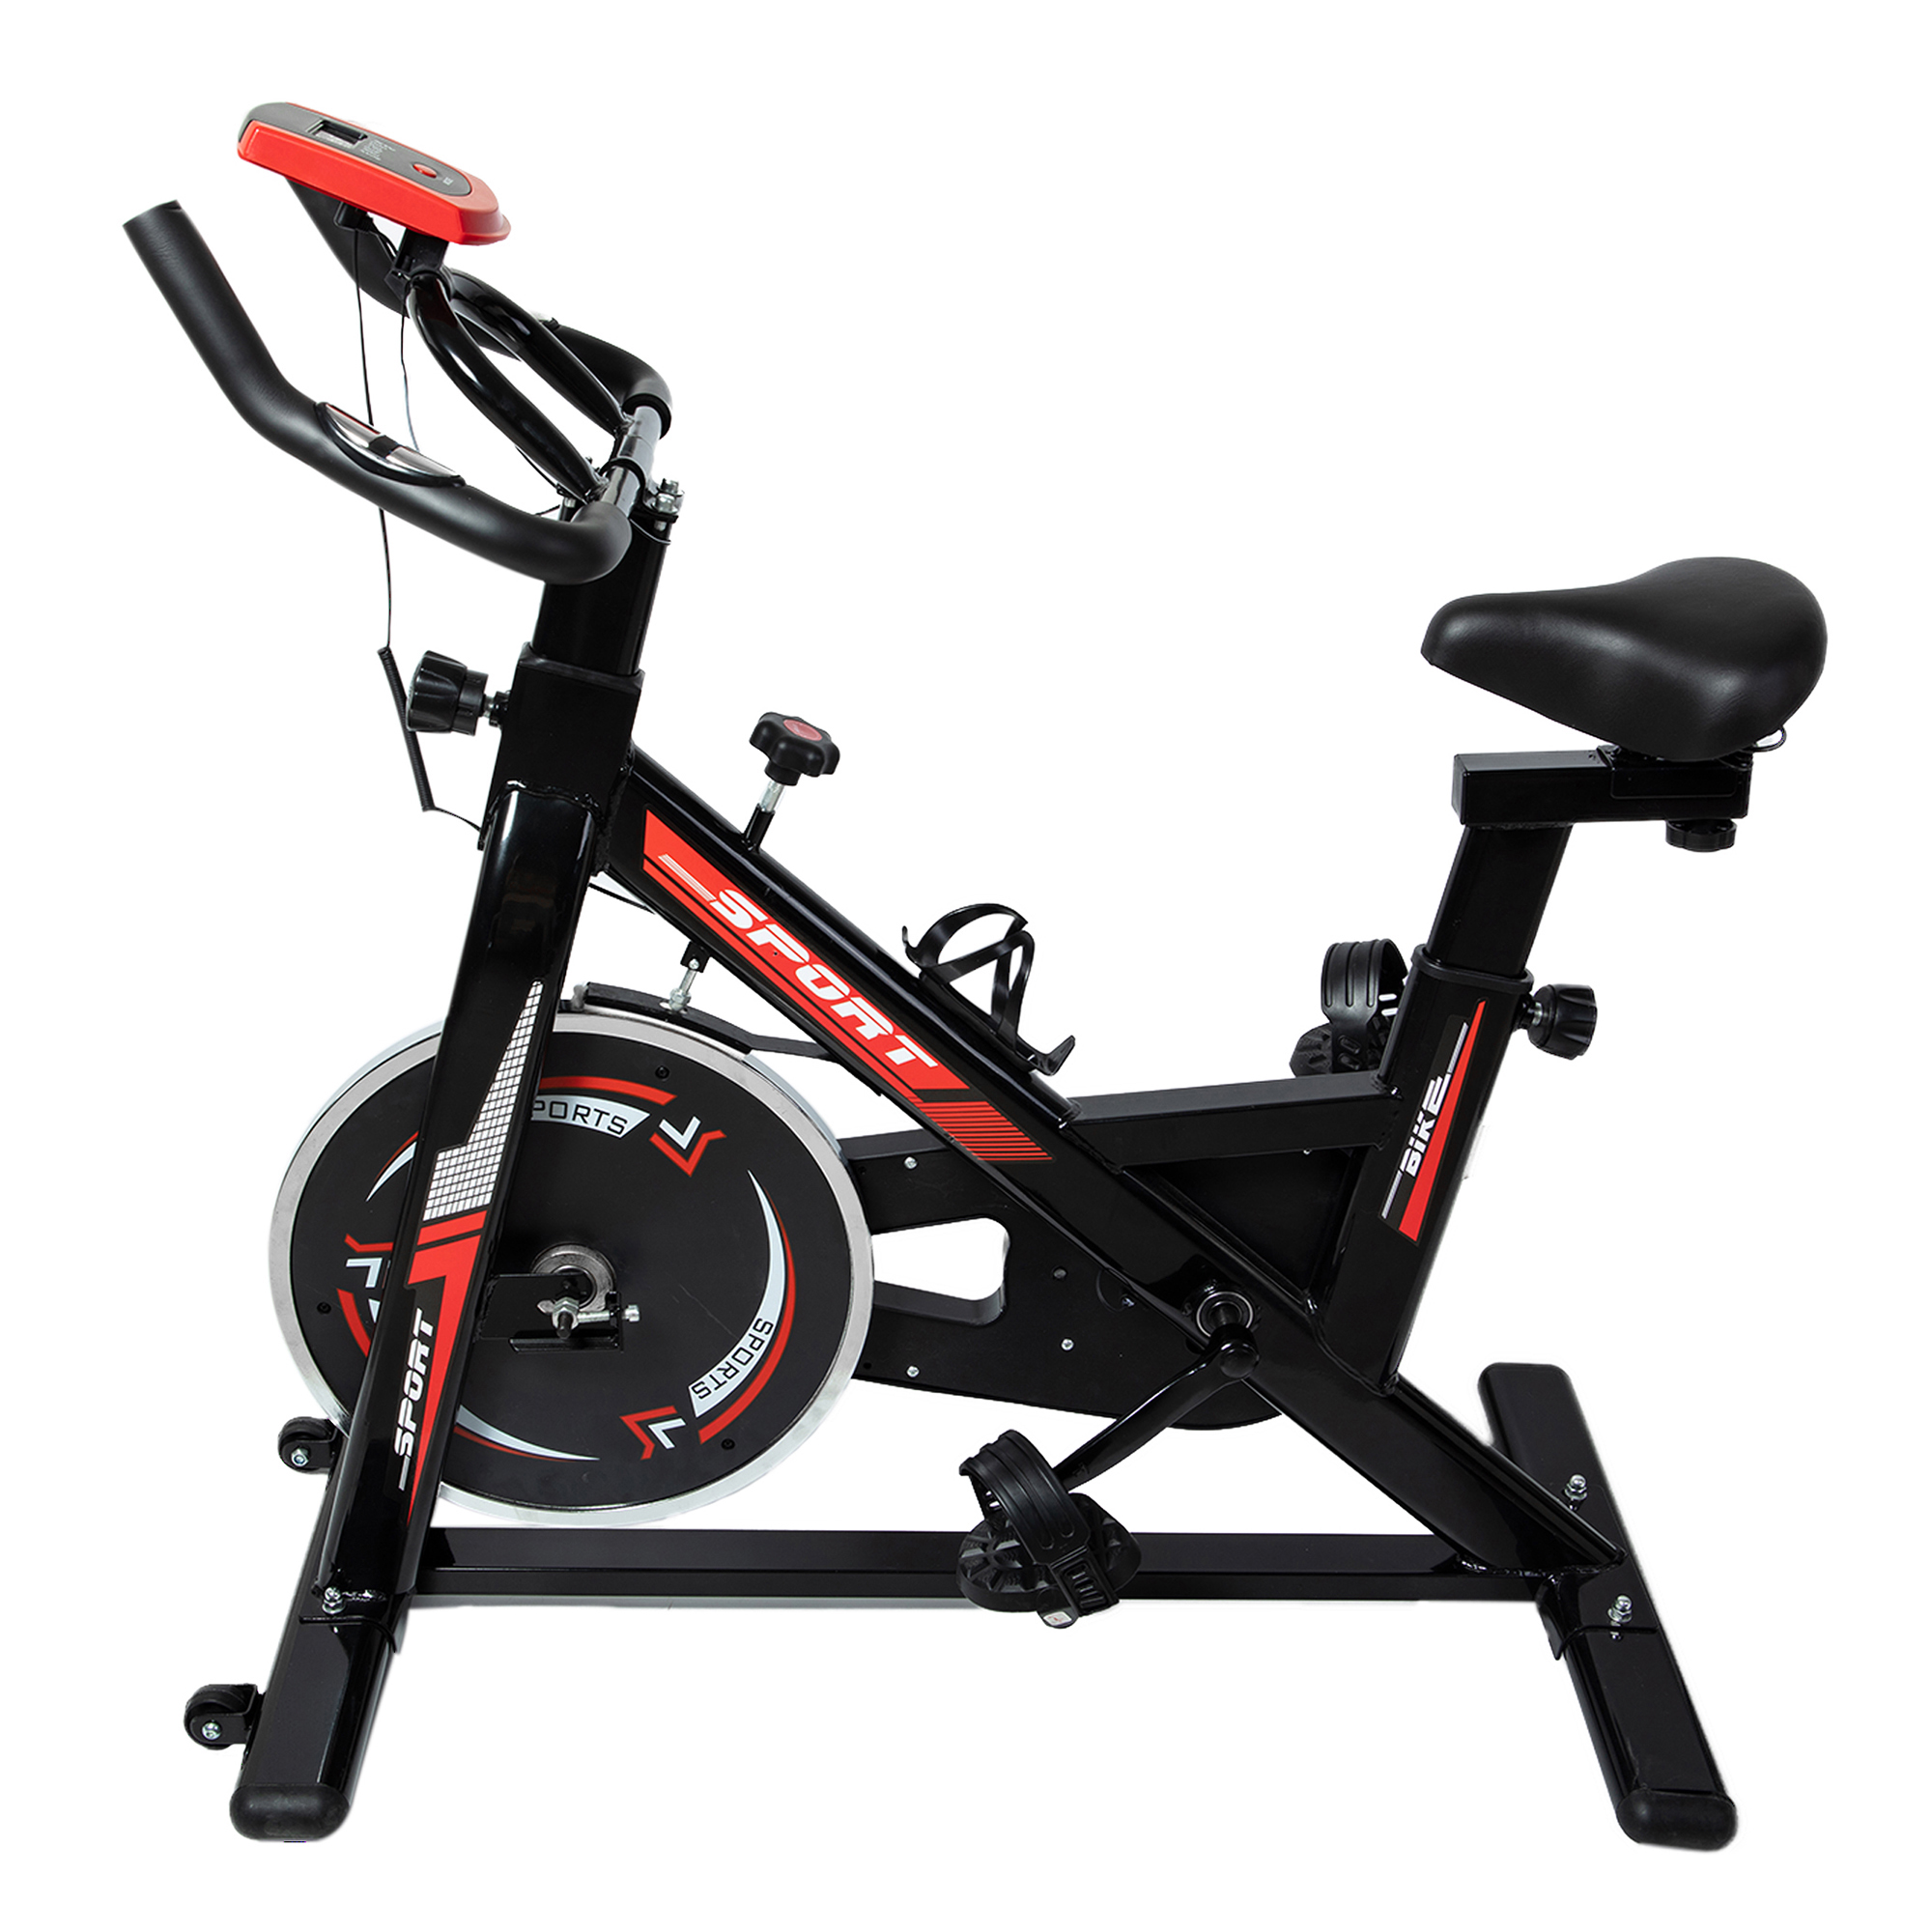 Details about  / Gym Exercise Bike Stationary Bicycle Indoor Cycling Cardio Fitness Workout